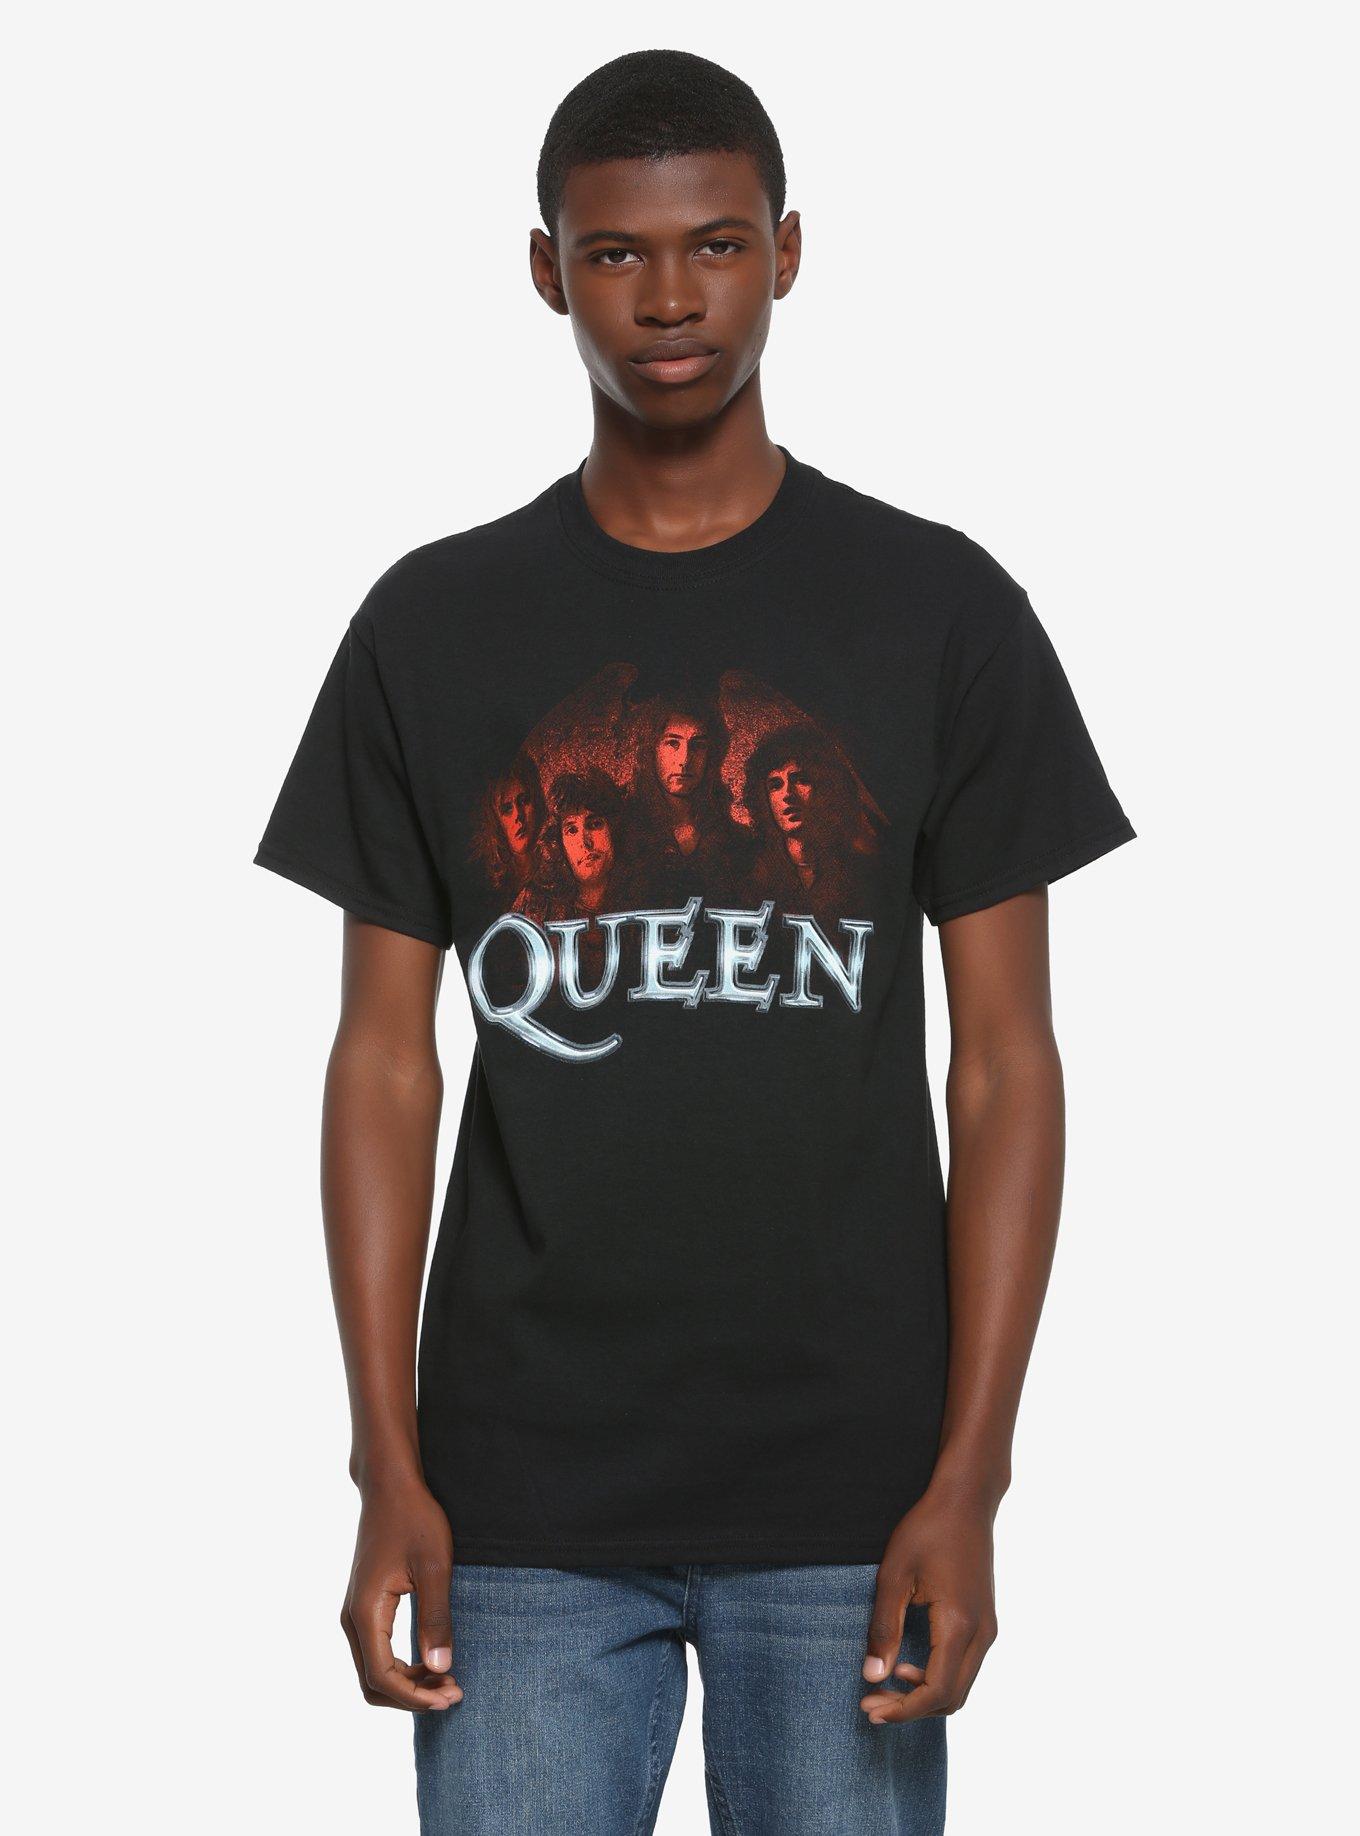 OFFICIAL T-Shirts & Merchandise | Hot Topic